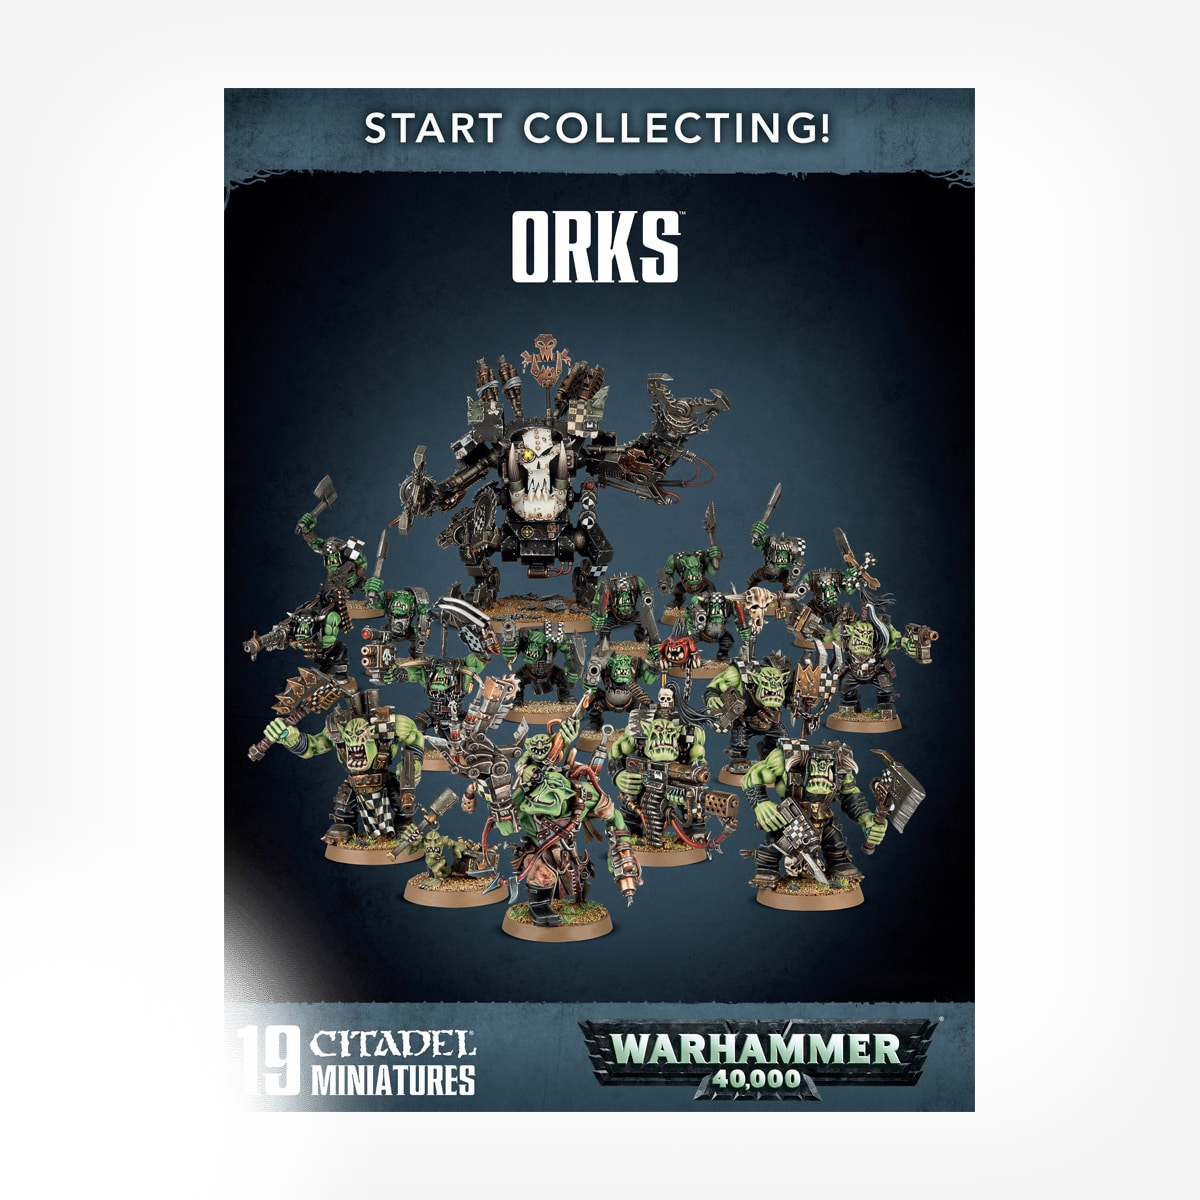 Start collection. Start collecting Orks. Warhammer start collecting. Games Workshop start collecting Orks. Warhammer all start collecting!.